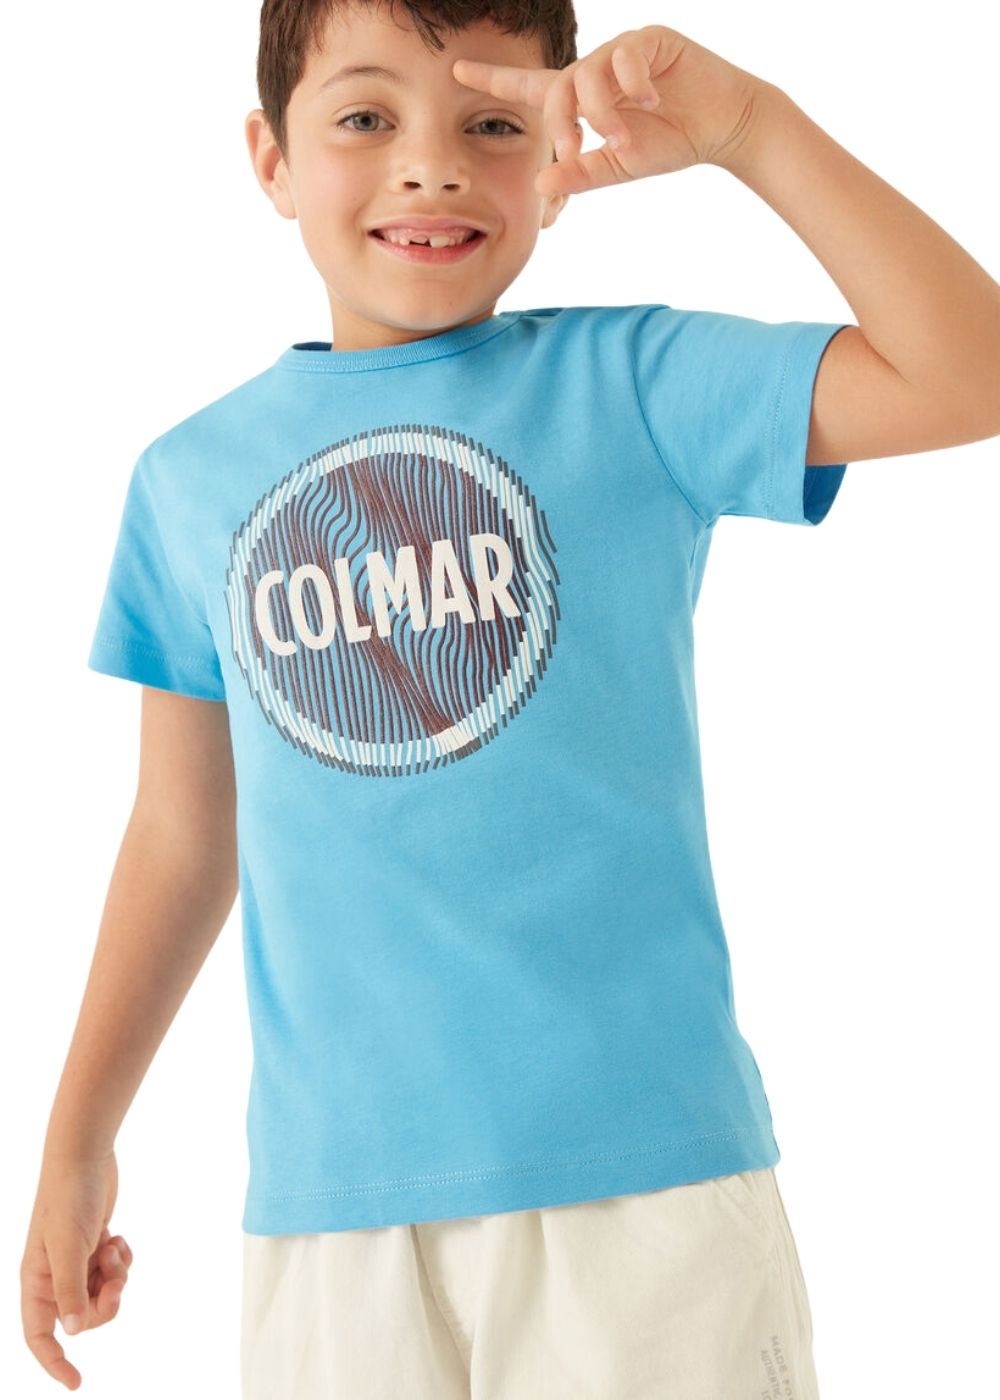 Featured image for “COLMAR T-SHIRT IN COTONE”